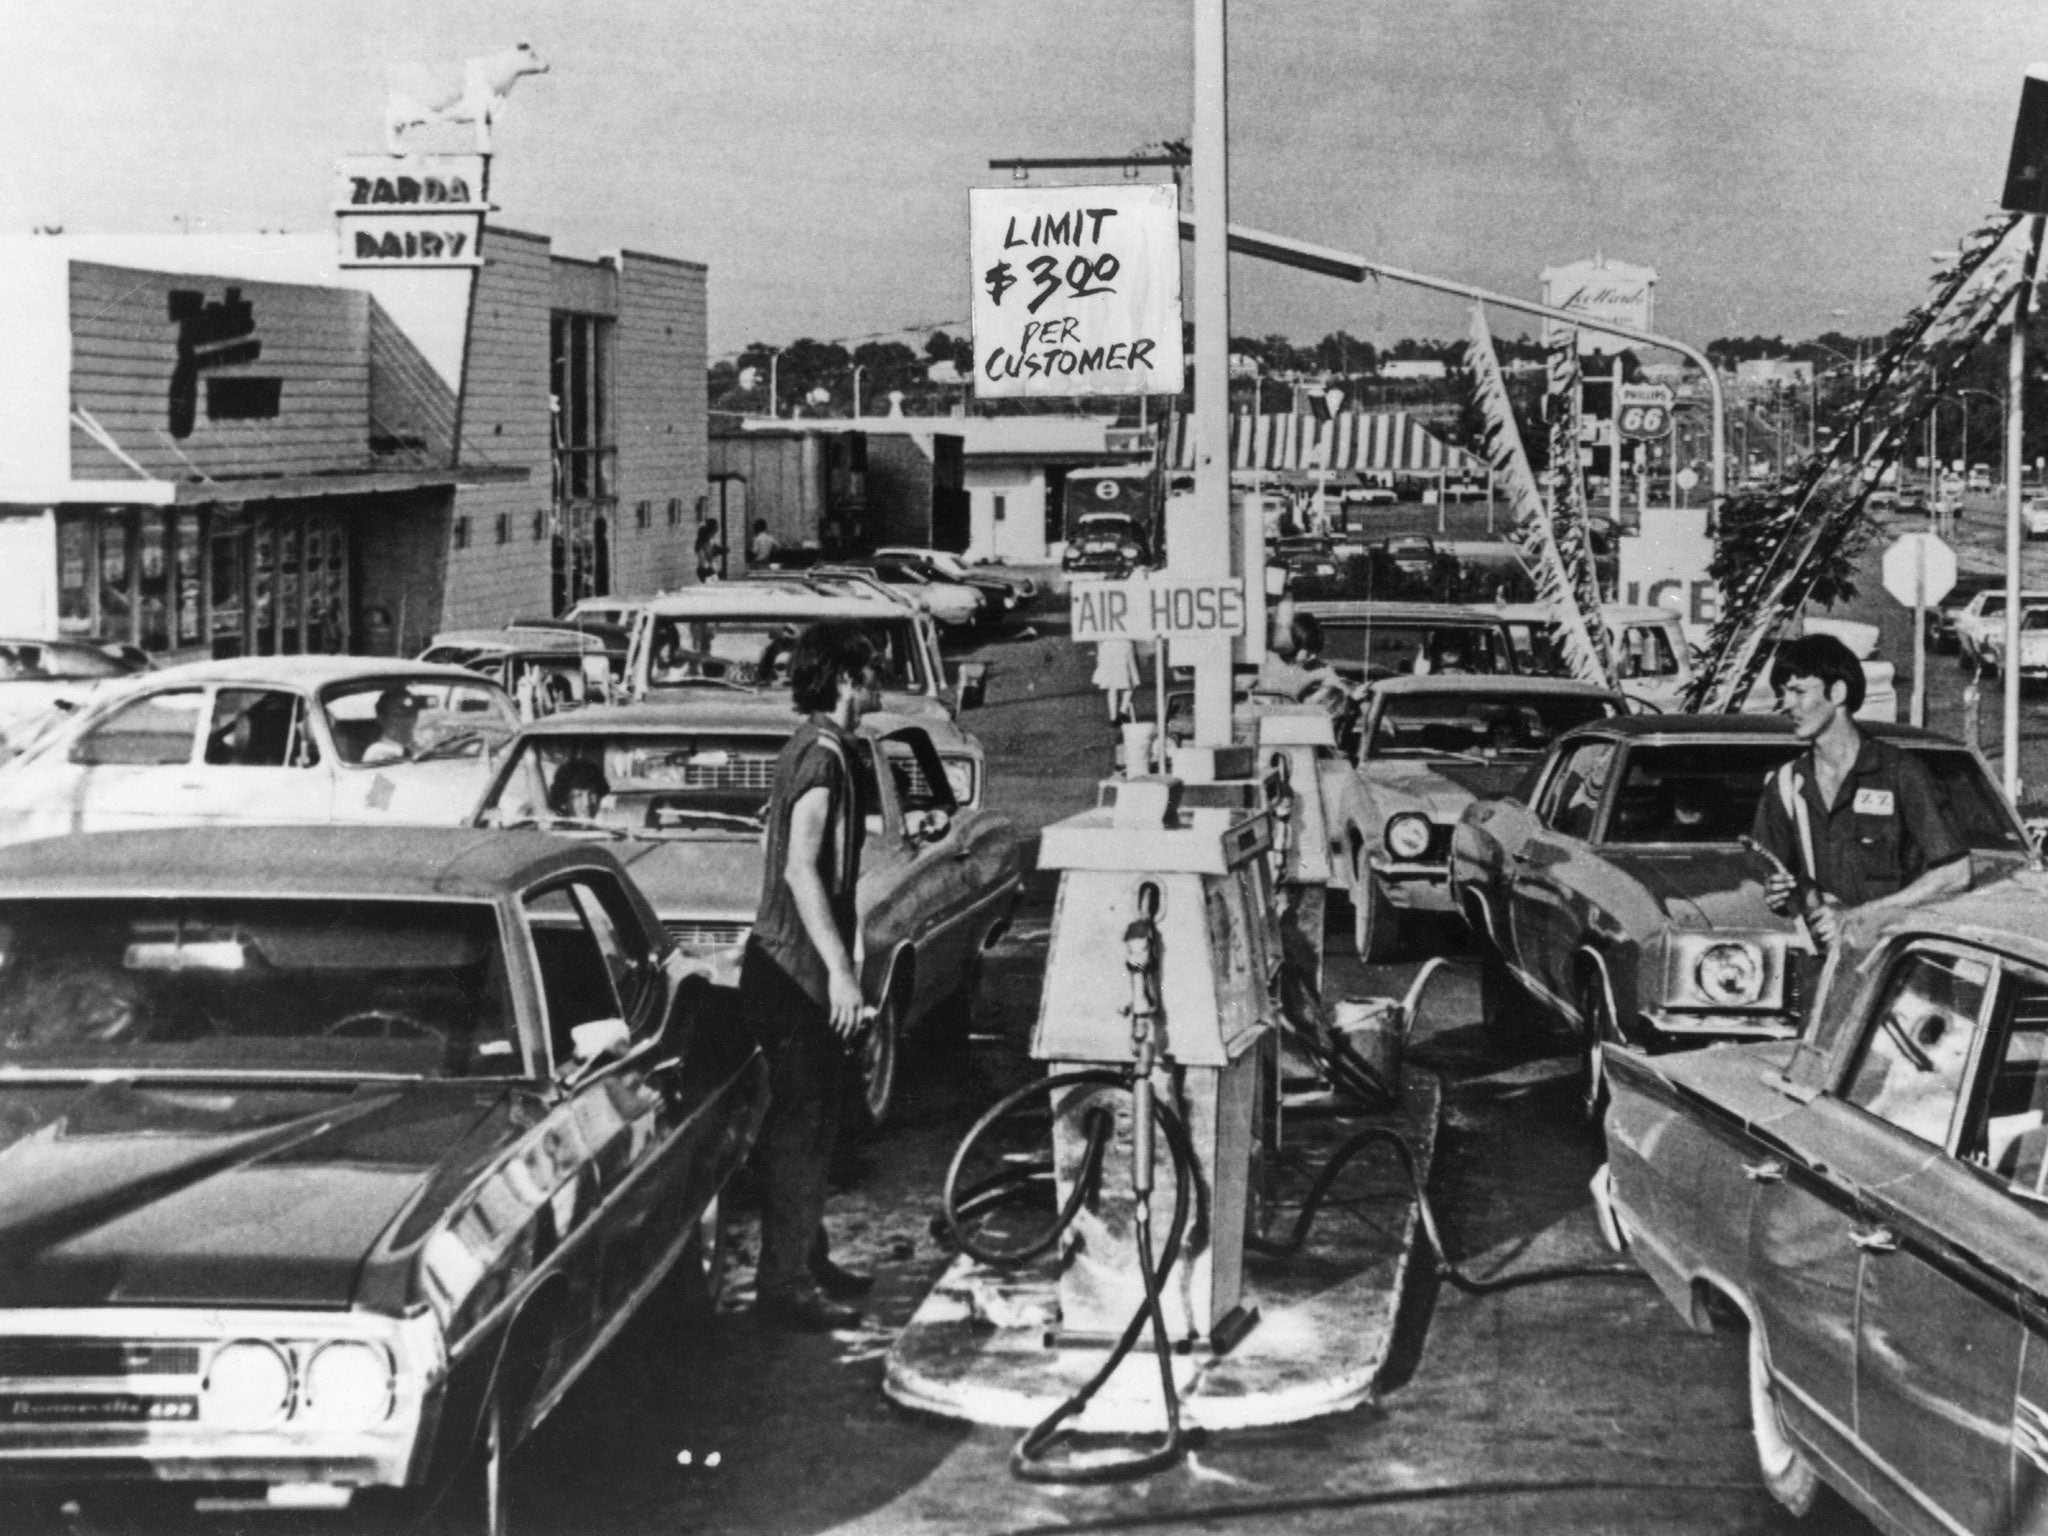 Drivers line up for fuel at a US gas station during the worldwide fuel shortages caused by the oil embargo imposed by OPEC, circa 1974.